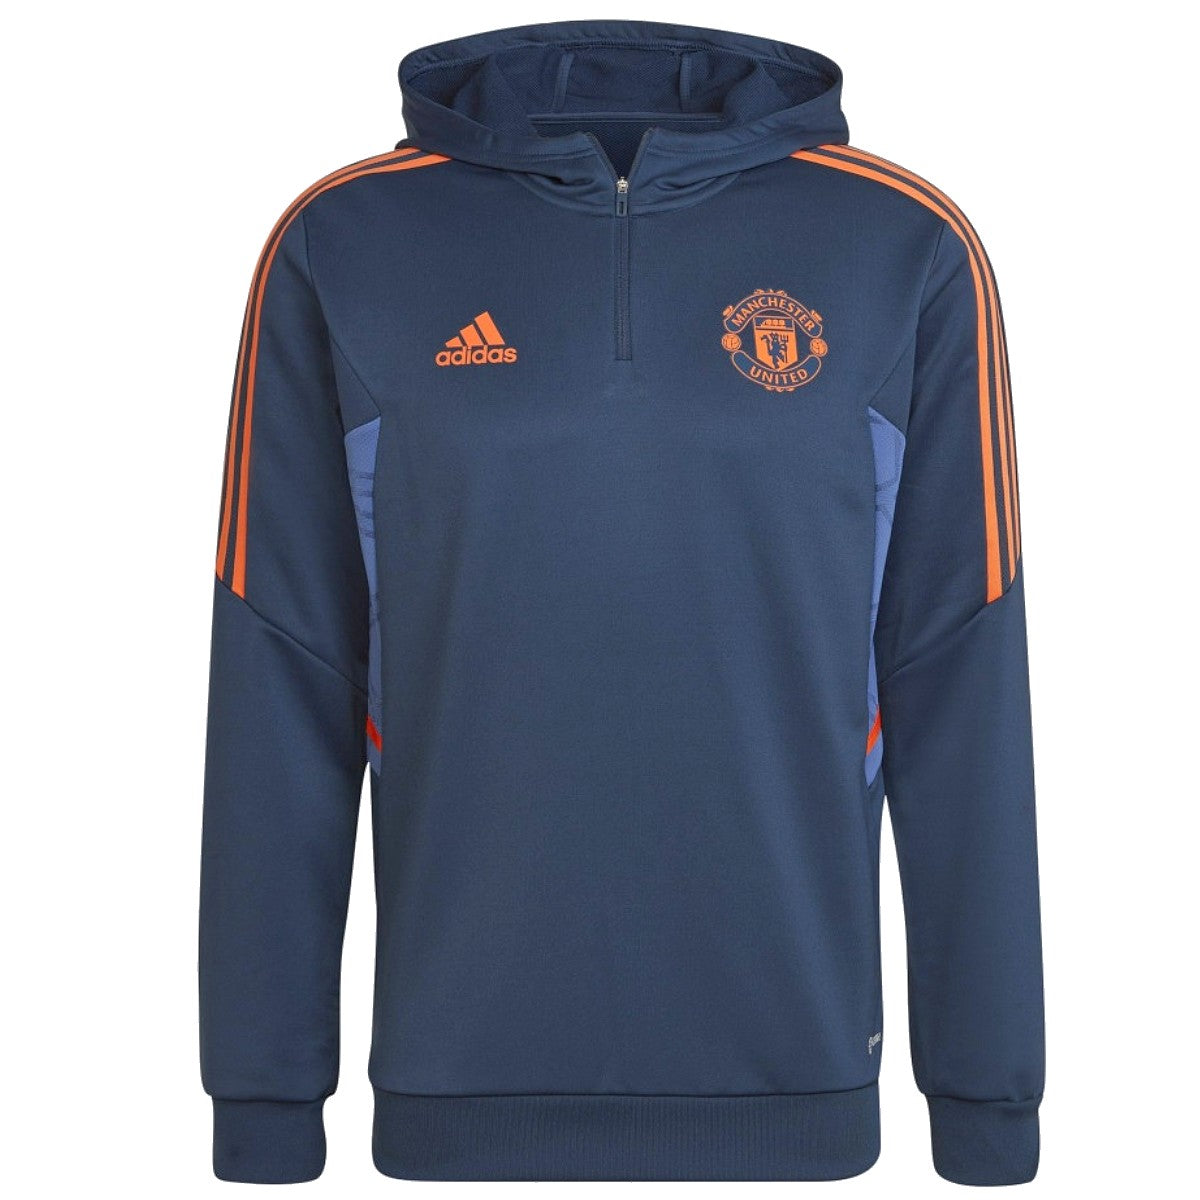 Manchester United hooded training technical soccer 2022/23 - Adidas SoccerTracksuits.com